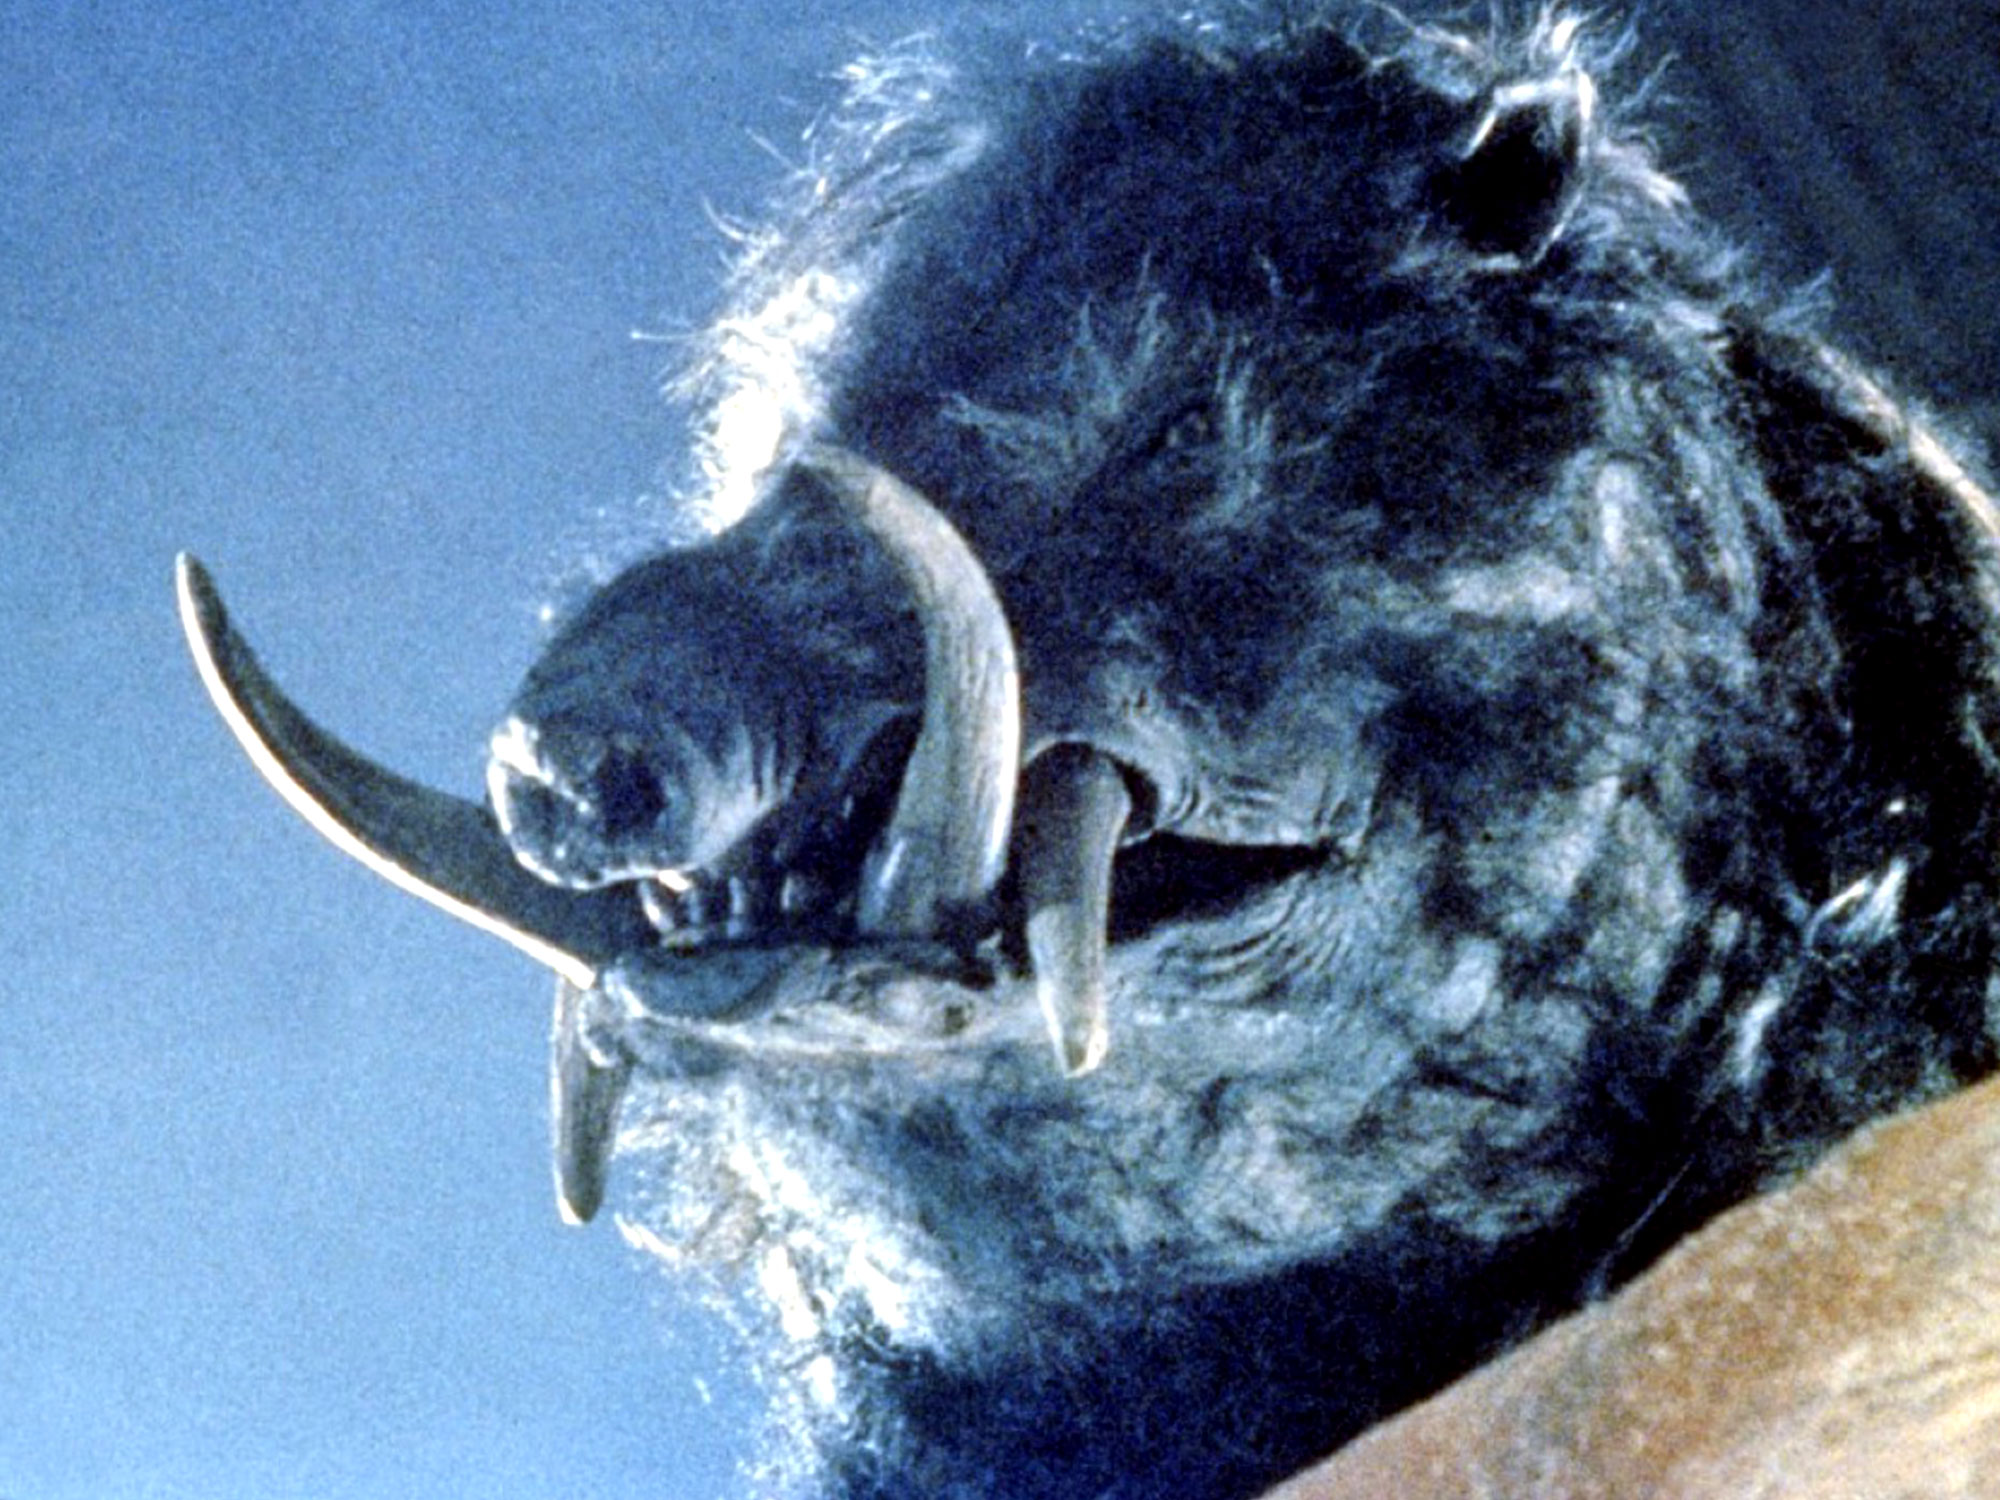 Seven classic animal attack movies you've never heard of - Little White Lies